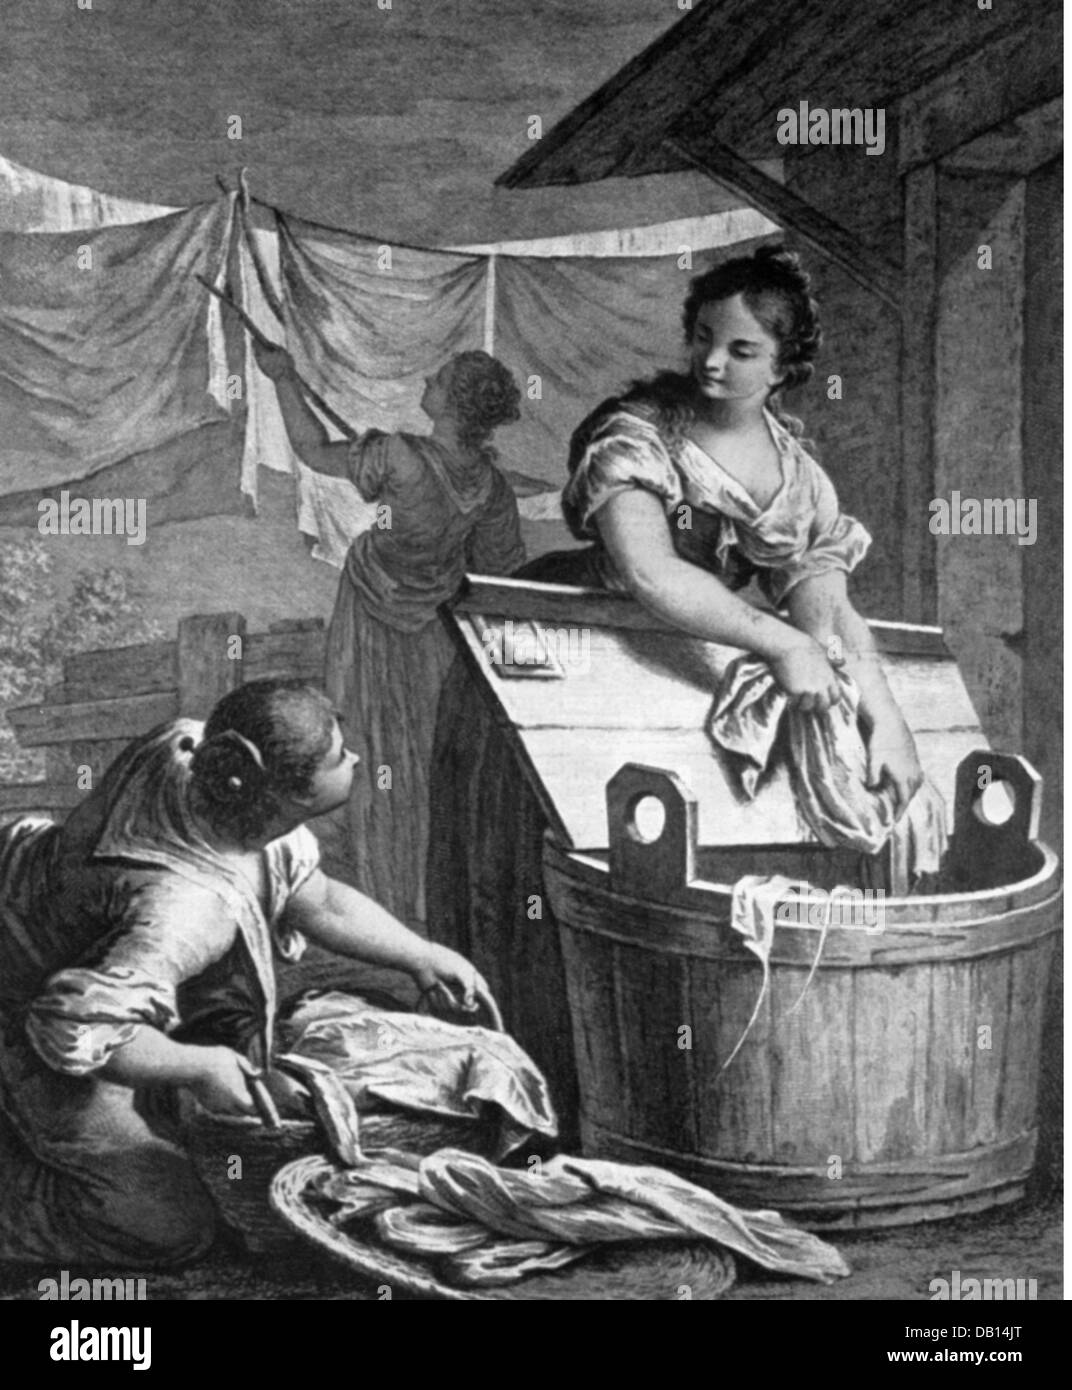 household,washing,laundresses,engraving,18th century,18th century,graphic,graphics,household,households,domestic work,housework,household chores,do the chores,housekeep,housewife,housewives,homemaker,half length,standing,tub,laundry,washing,wash,laundering,launder,conversation,conversations,talks,talk,talking,laundry basket,linen basket,hamper,laundry baskets,linen baskets,hampers,clothesline,clotheslines,drying,dry,laundresses,laundress,washerwomen,washwomen,historic,historical,female,woman,women,people,Additional-Rights-Clearences-Not Available Stock Photo